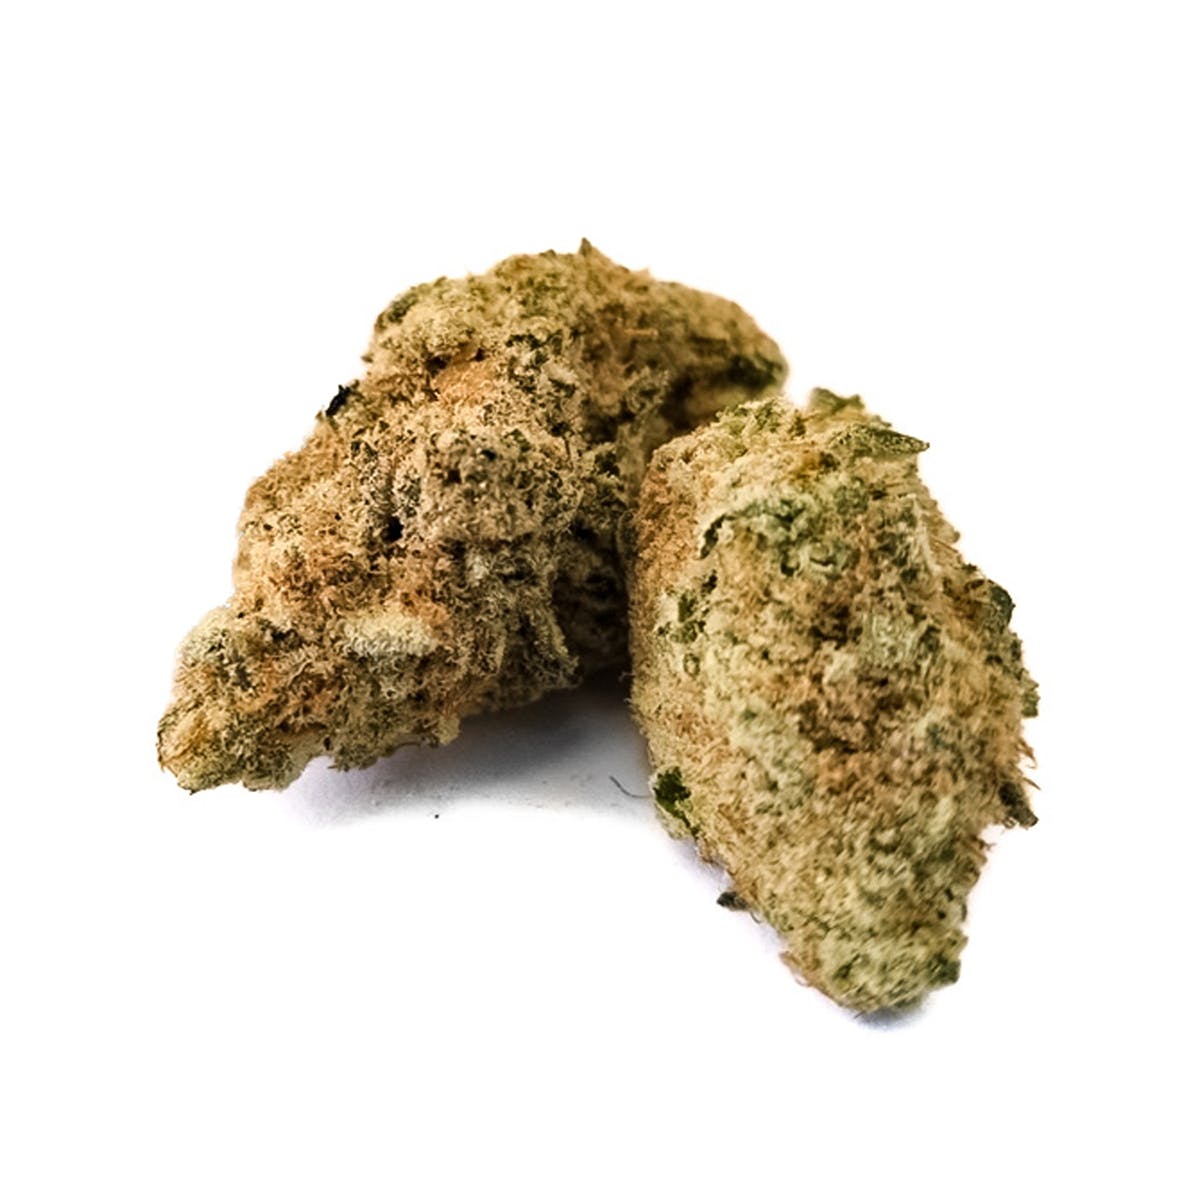 marijuana-dispensaries-mary-a-main-in-capitol-heights-girl-scout-cookies-231